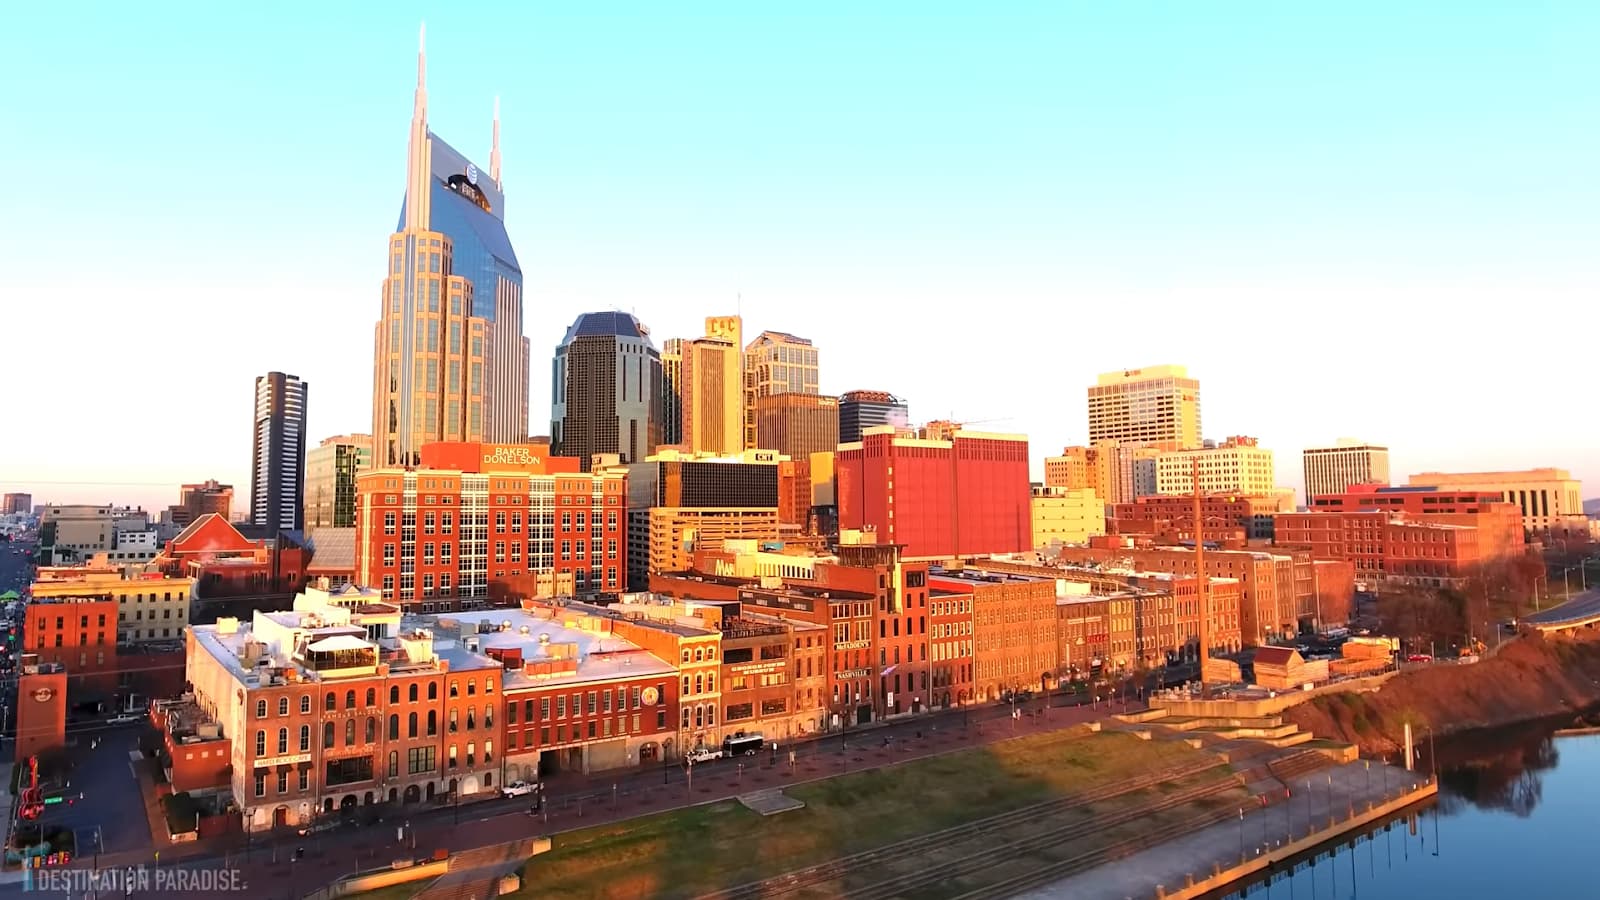 Sunset over Nashville with historic brick buildings in the foreground